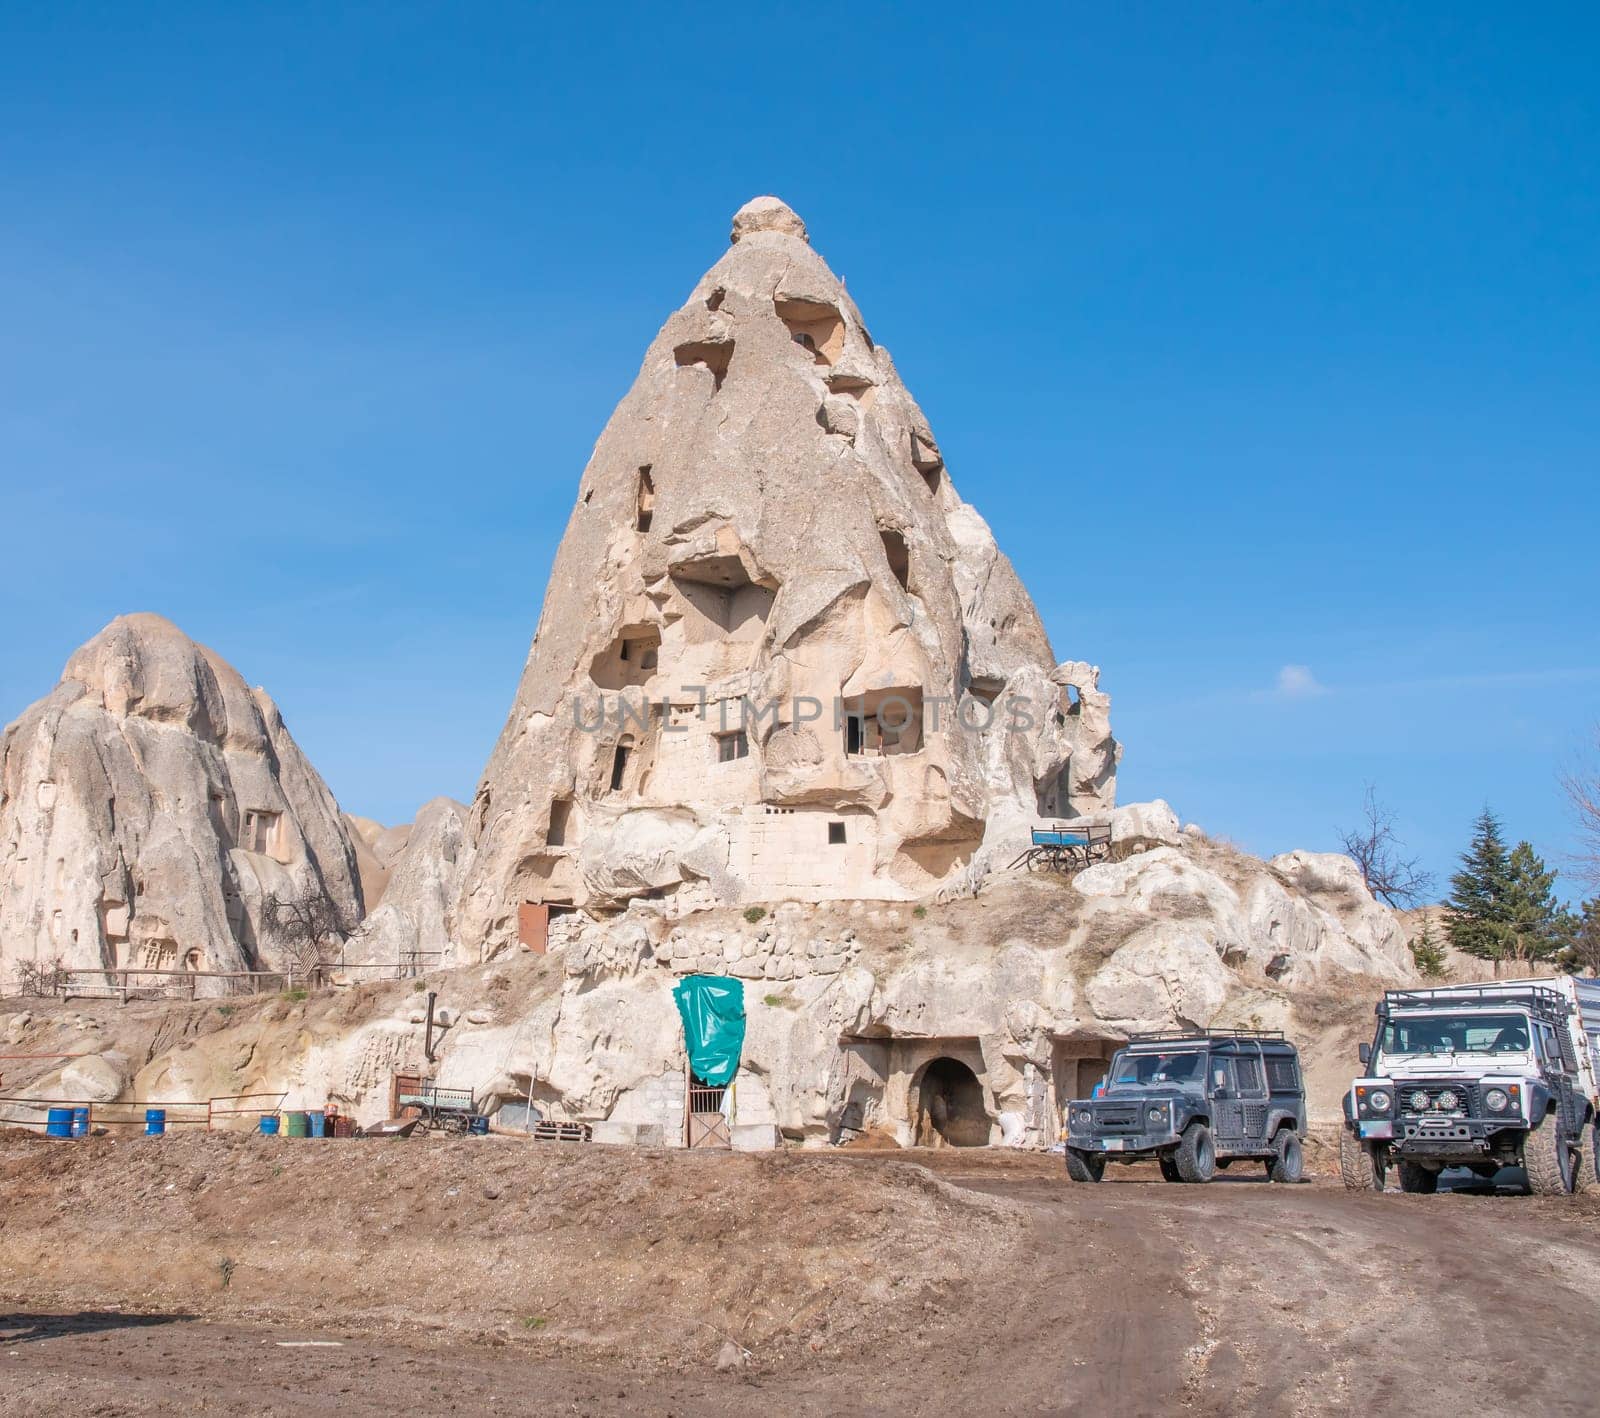 Volcanic mountain with windows near the city of Goreme in Turkey. Cappadocia. by DovidPro